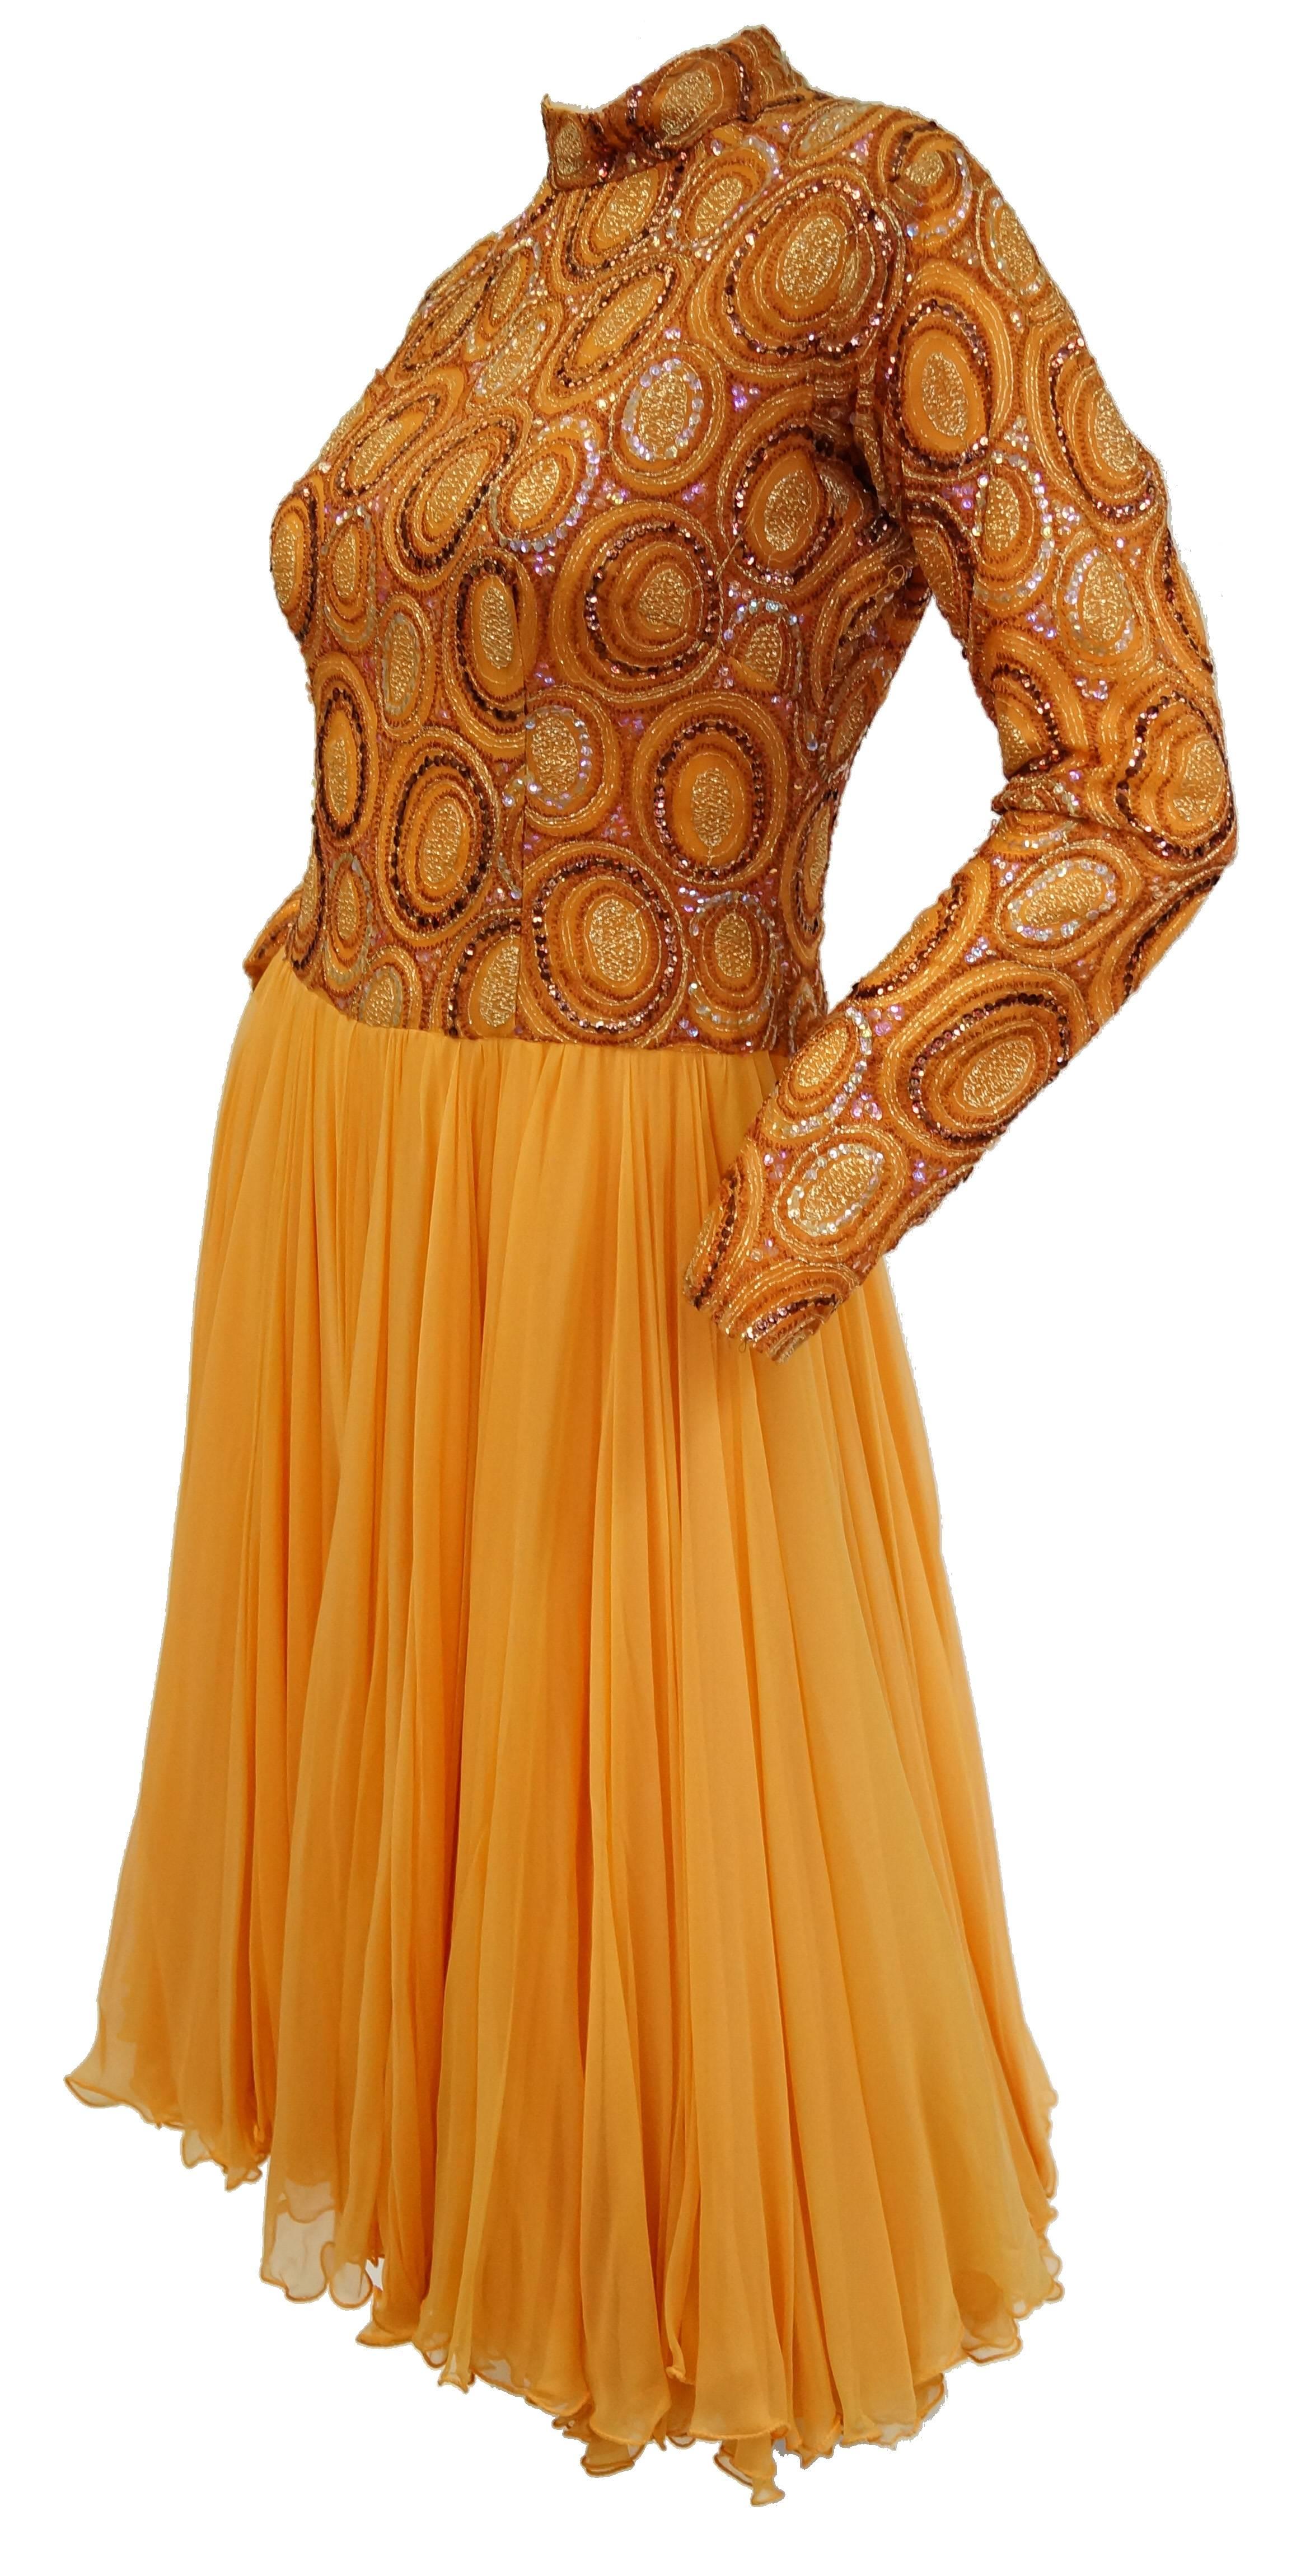 This undeniably bubbly cocktail dress features a bouncy, layered chiffon skirt with micro pleats, and an eye catching bubble sequined bodice and sleeves in iridescent amber, violet, and pearl. The knee length dress has long sleeves and a turtleneck